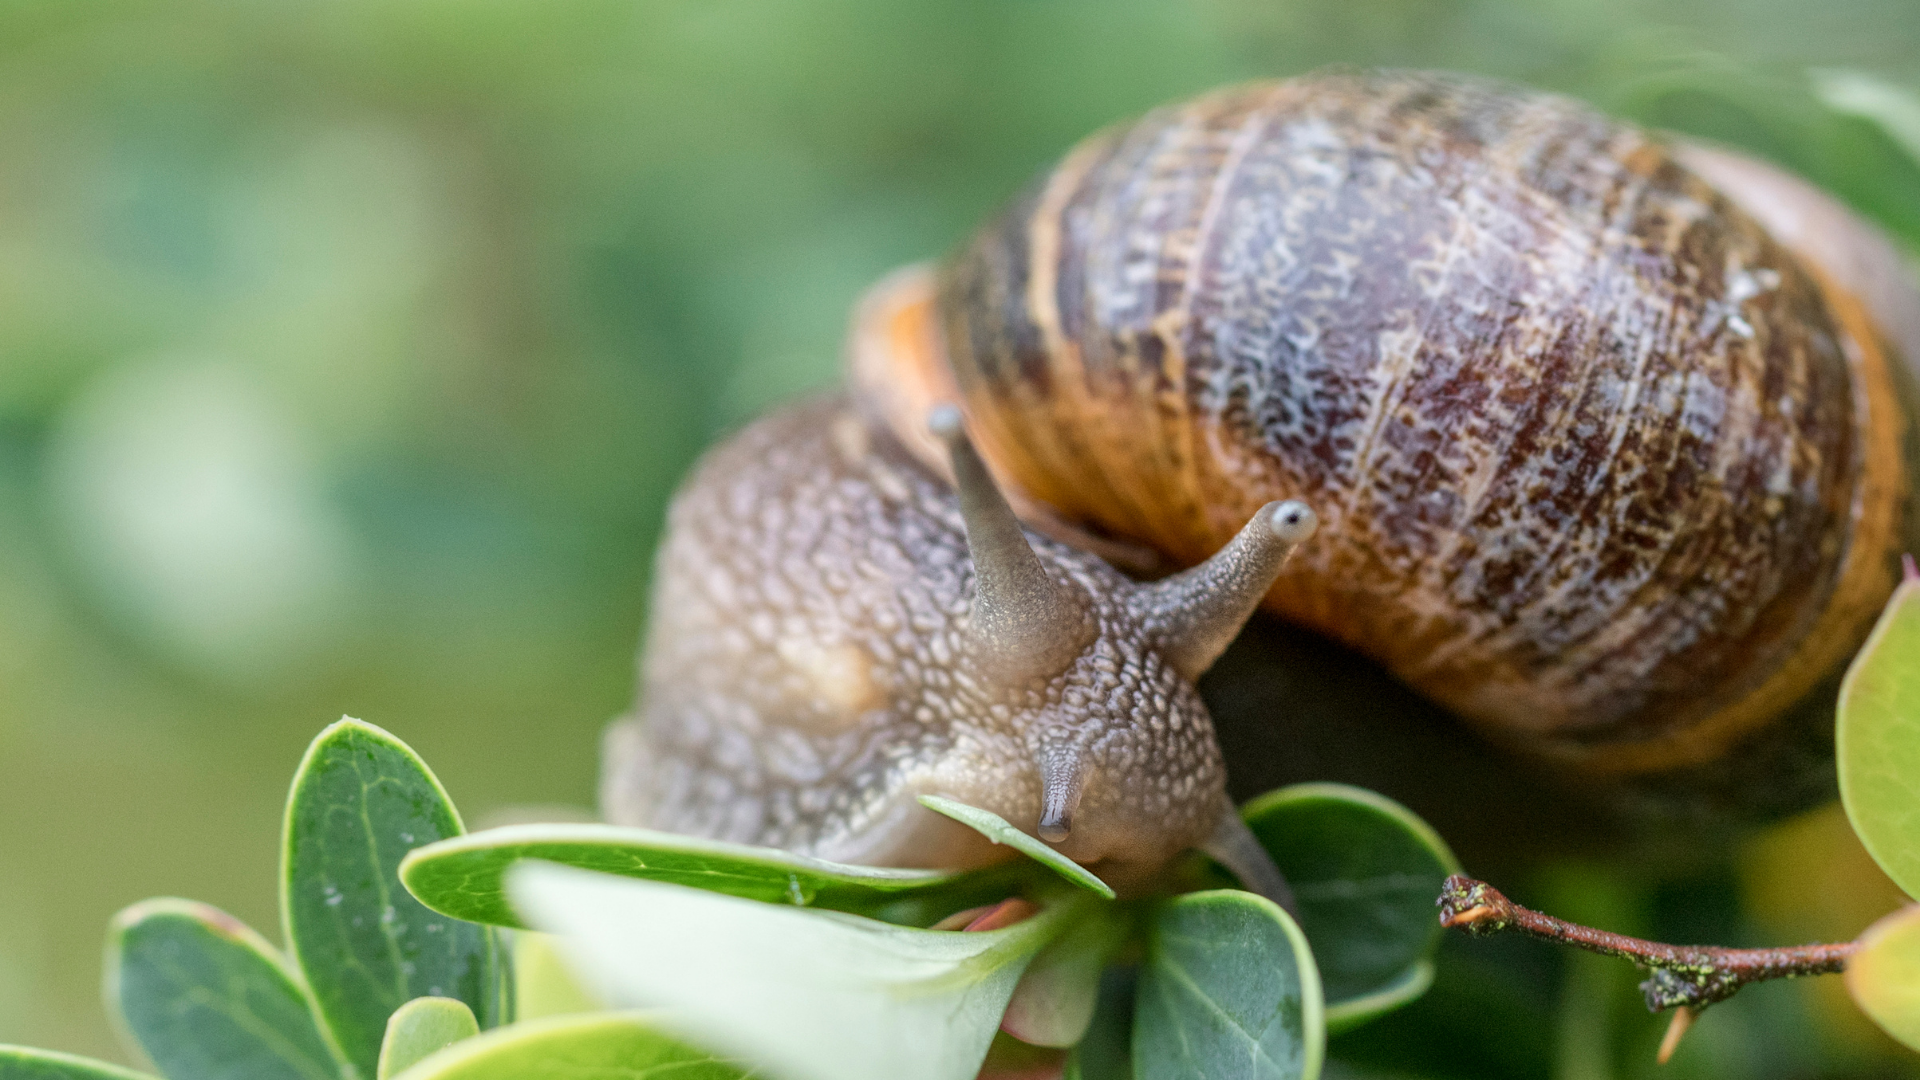 A snail chewing on a leaf.